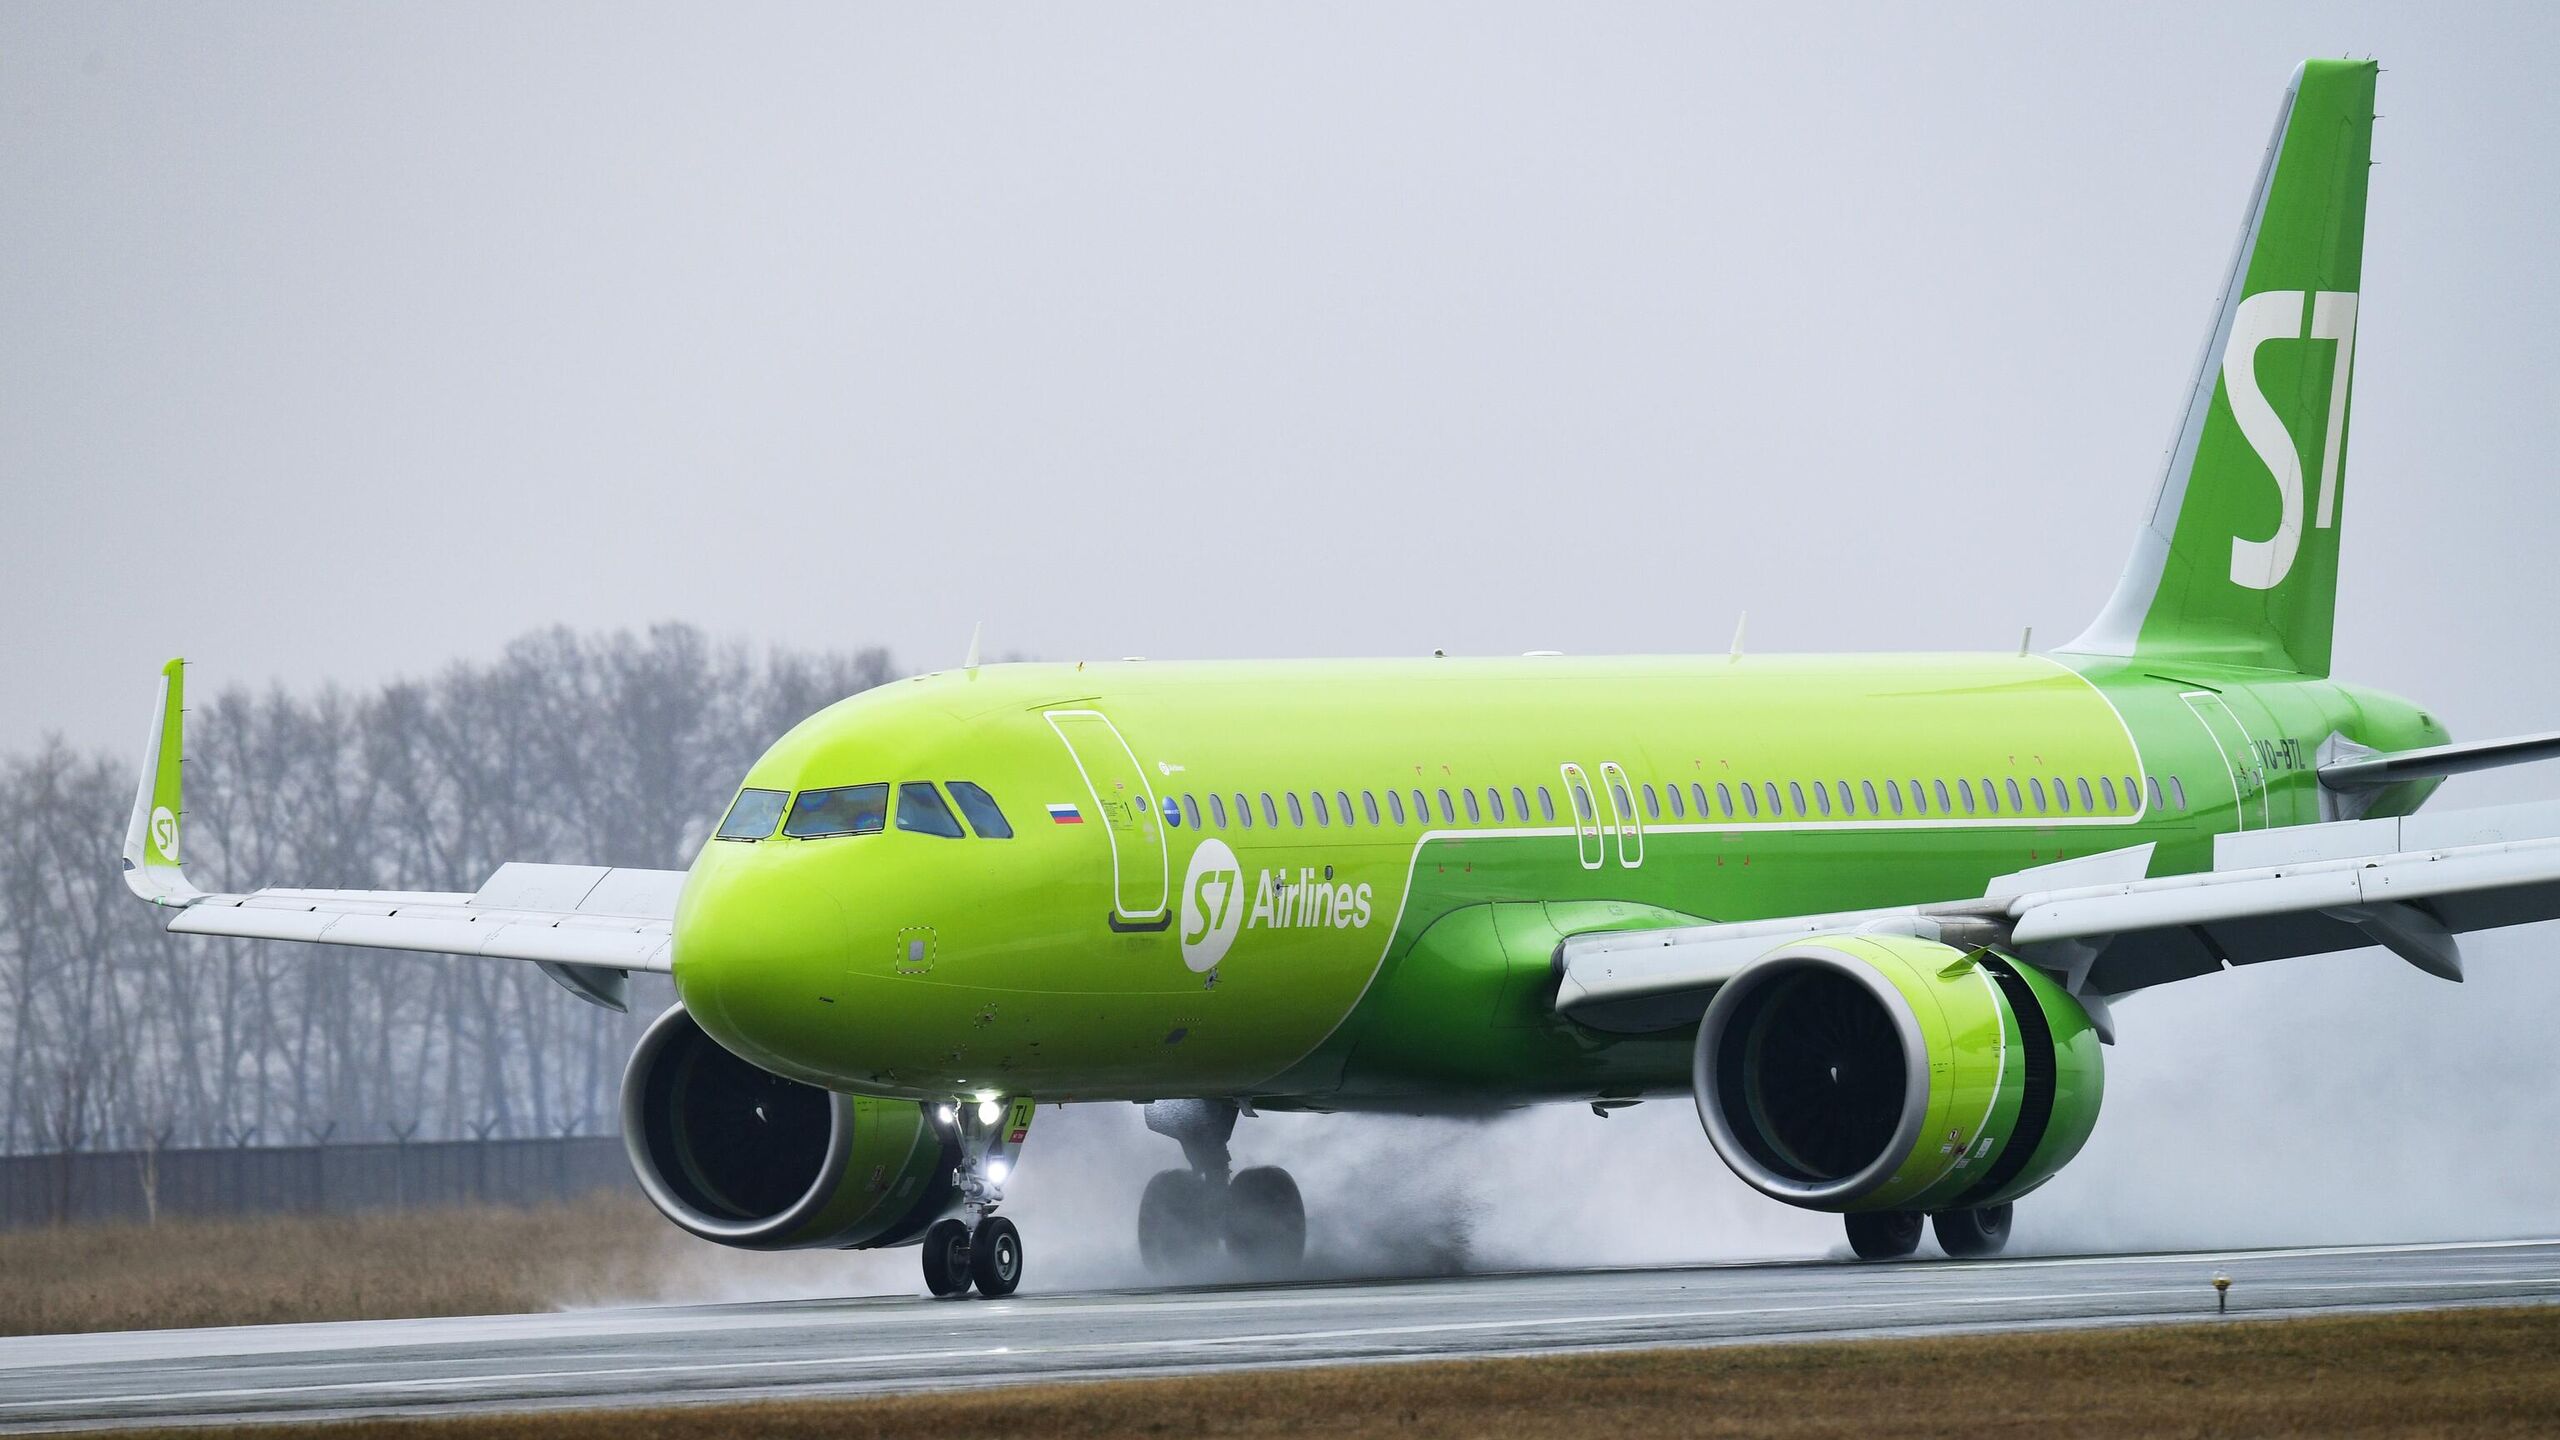 S7 airlines россия. A320 Neo s7. Самолёт s7 Airlines Airbus a320neo. A320neo. Аэробус а320 s7.